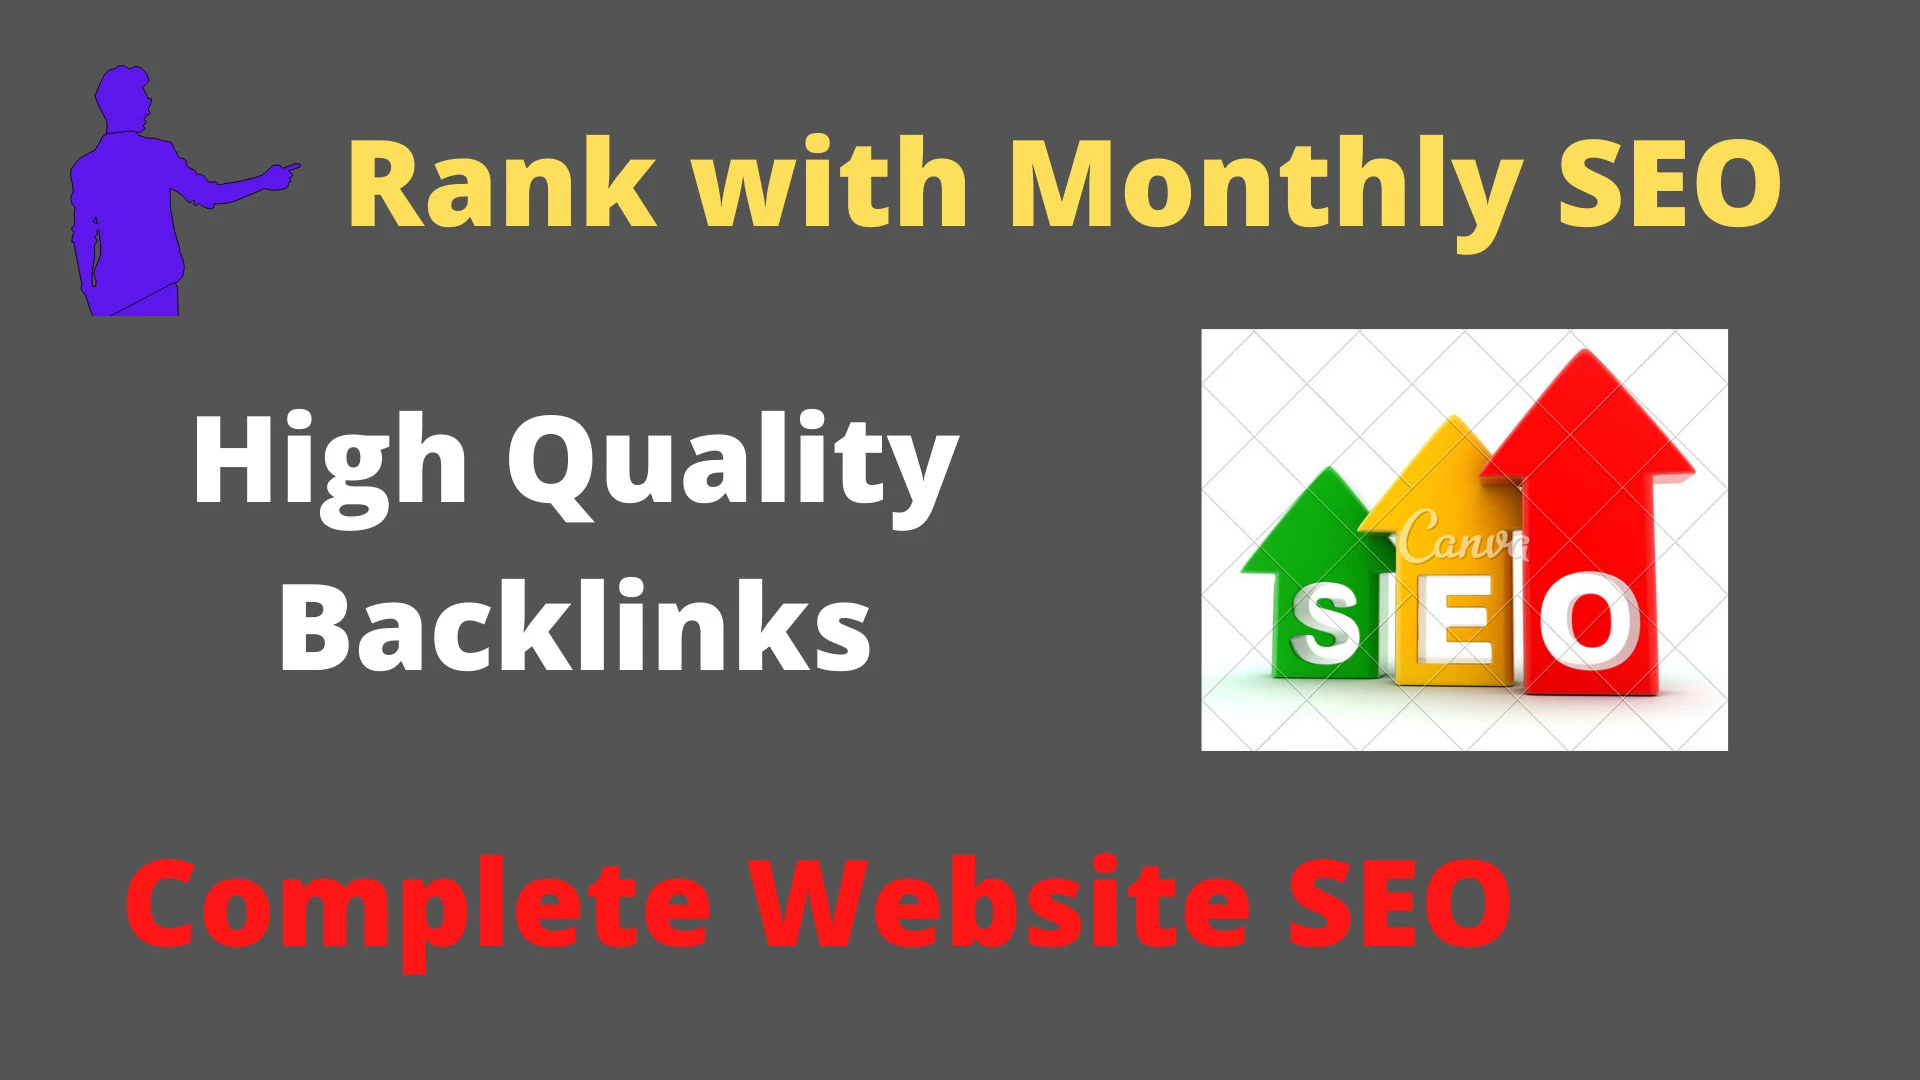 55363I will do SEO services for Google’s top 3 rankings